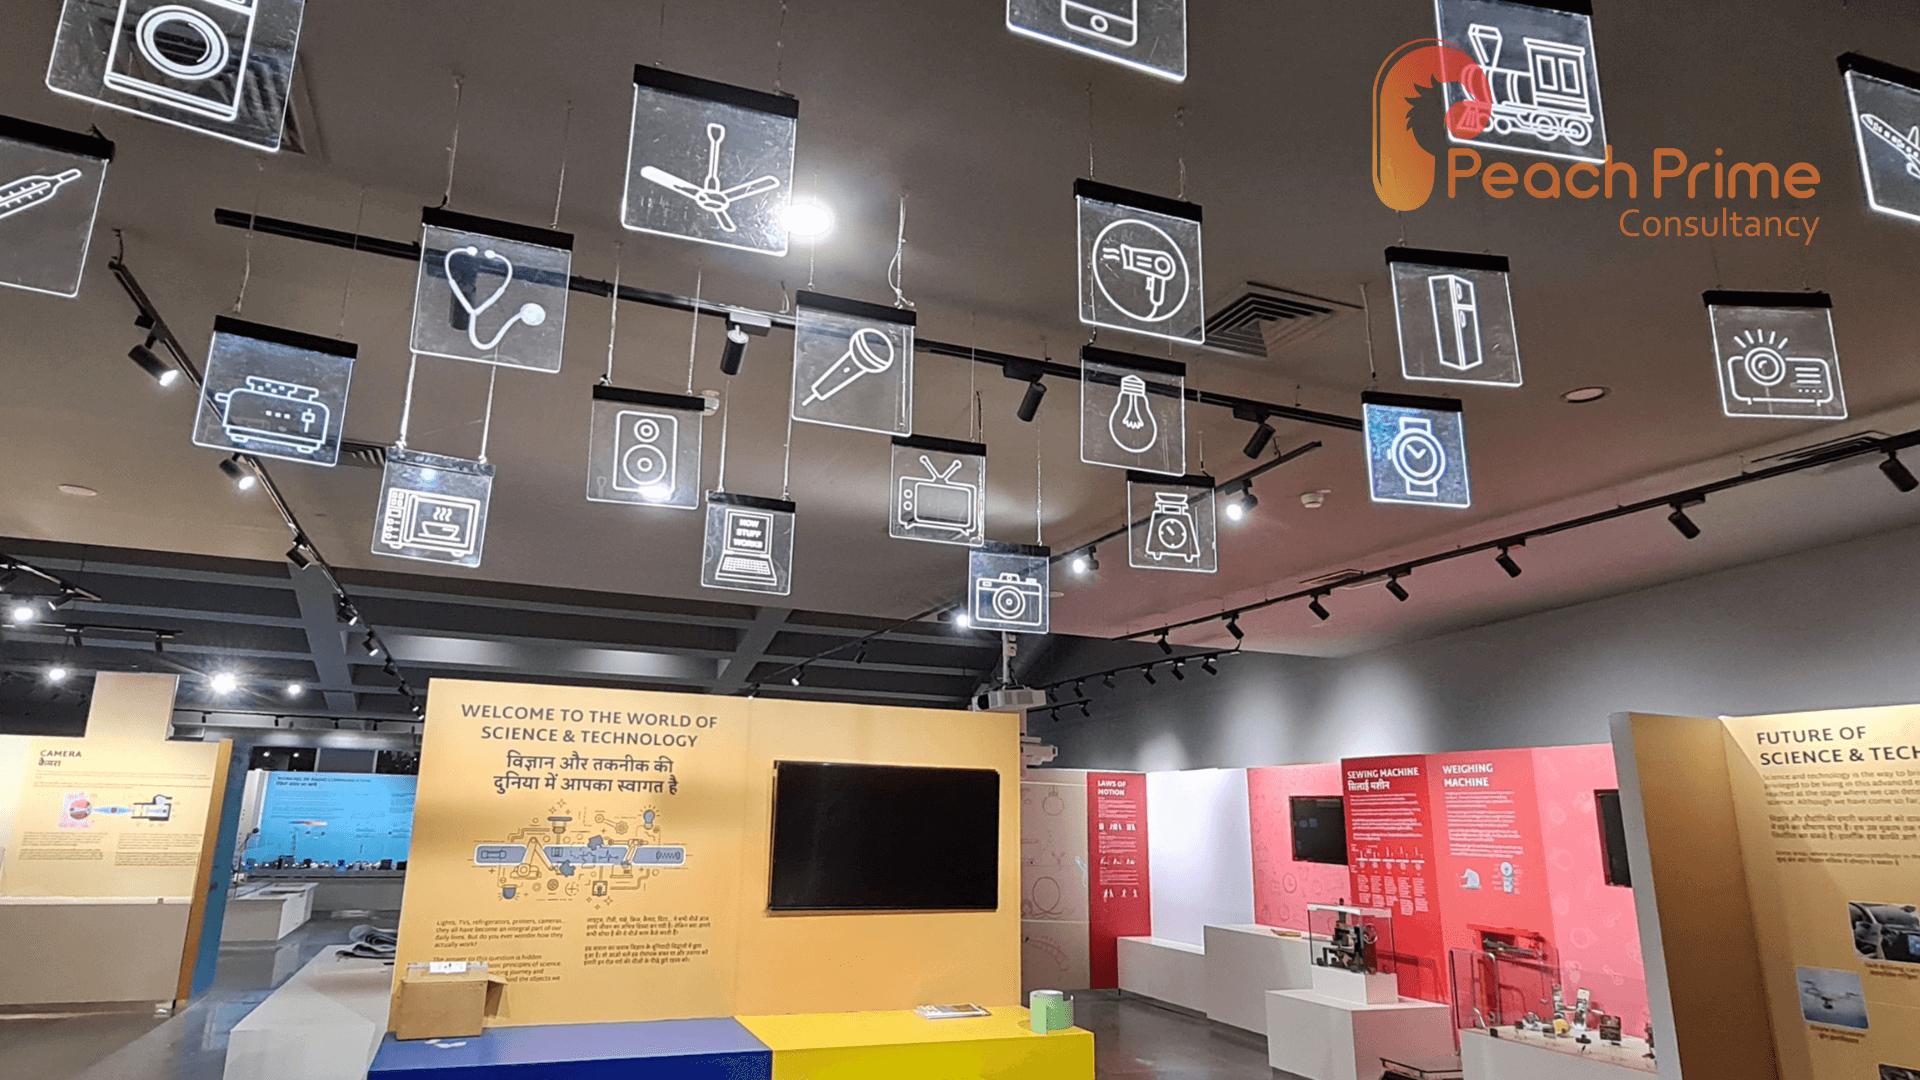 Gallery of Discoveries at Regional Science Museum Rajkot - Peach Prime Consultancy